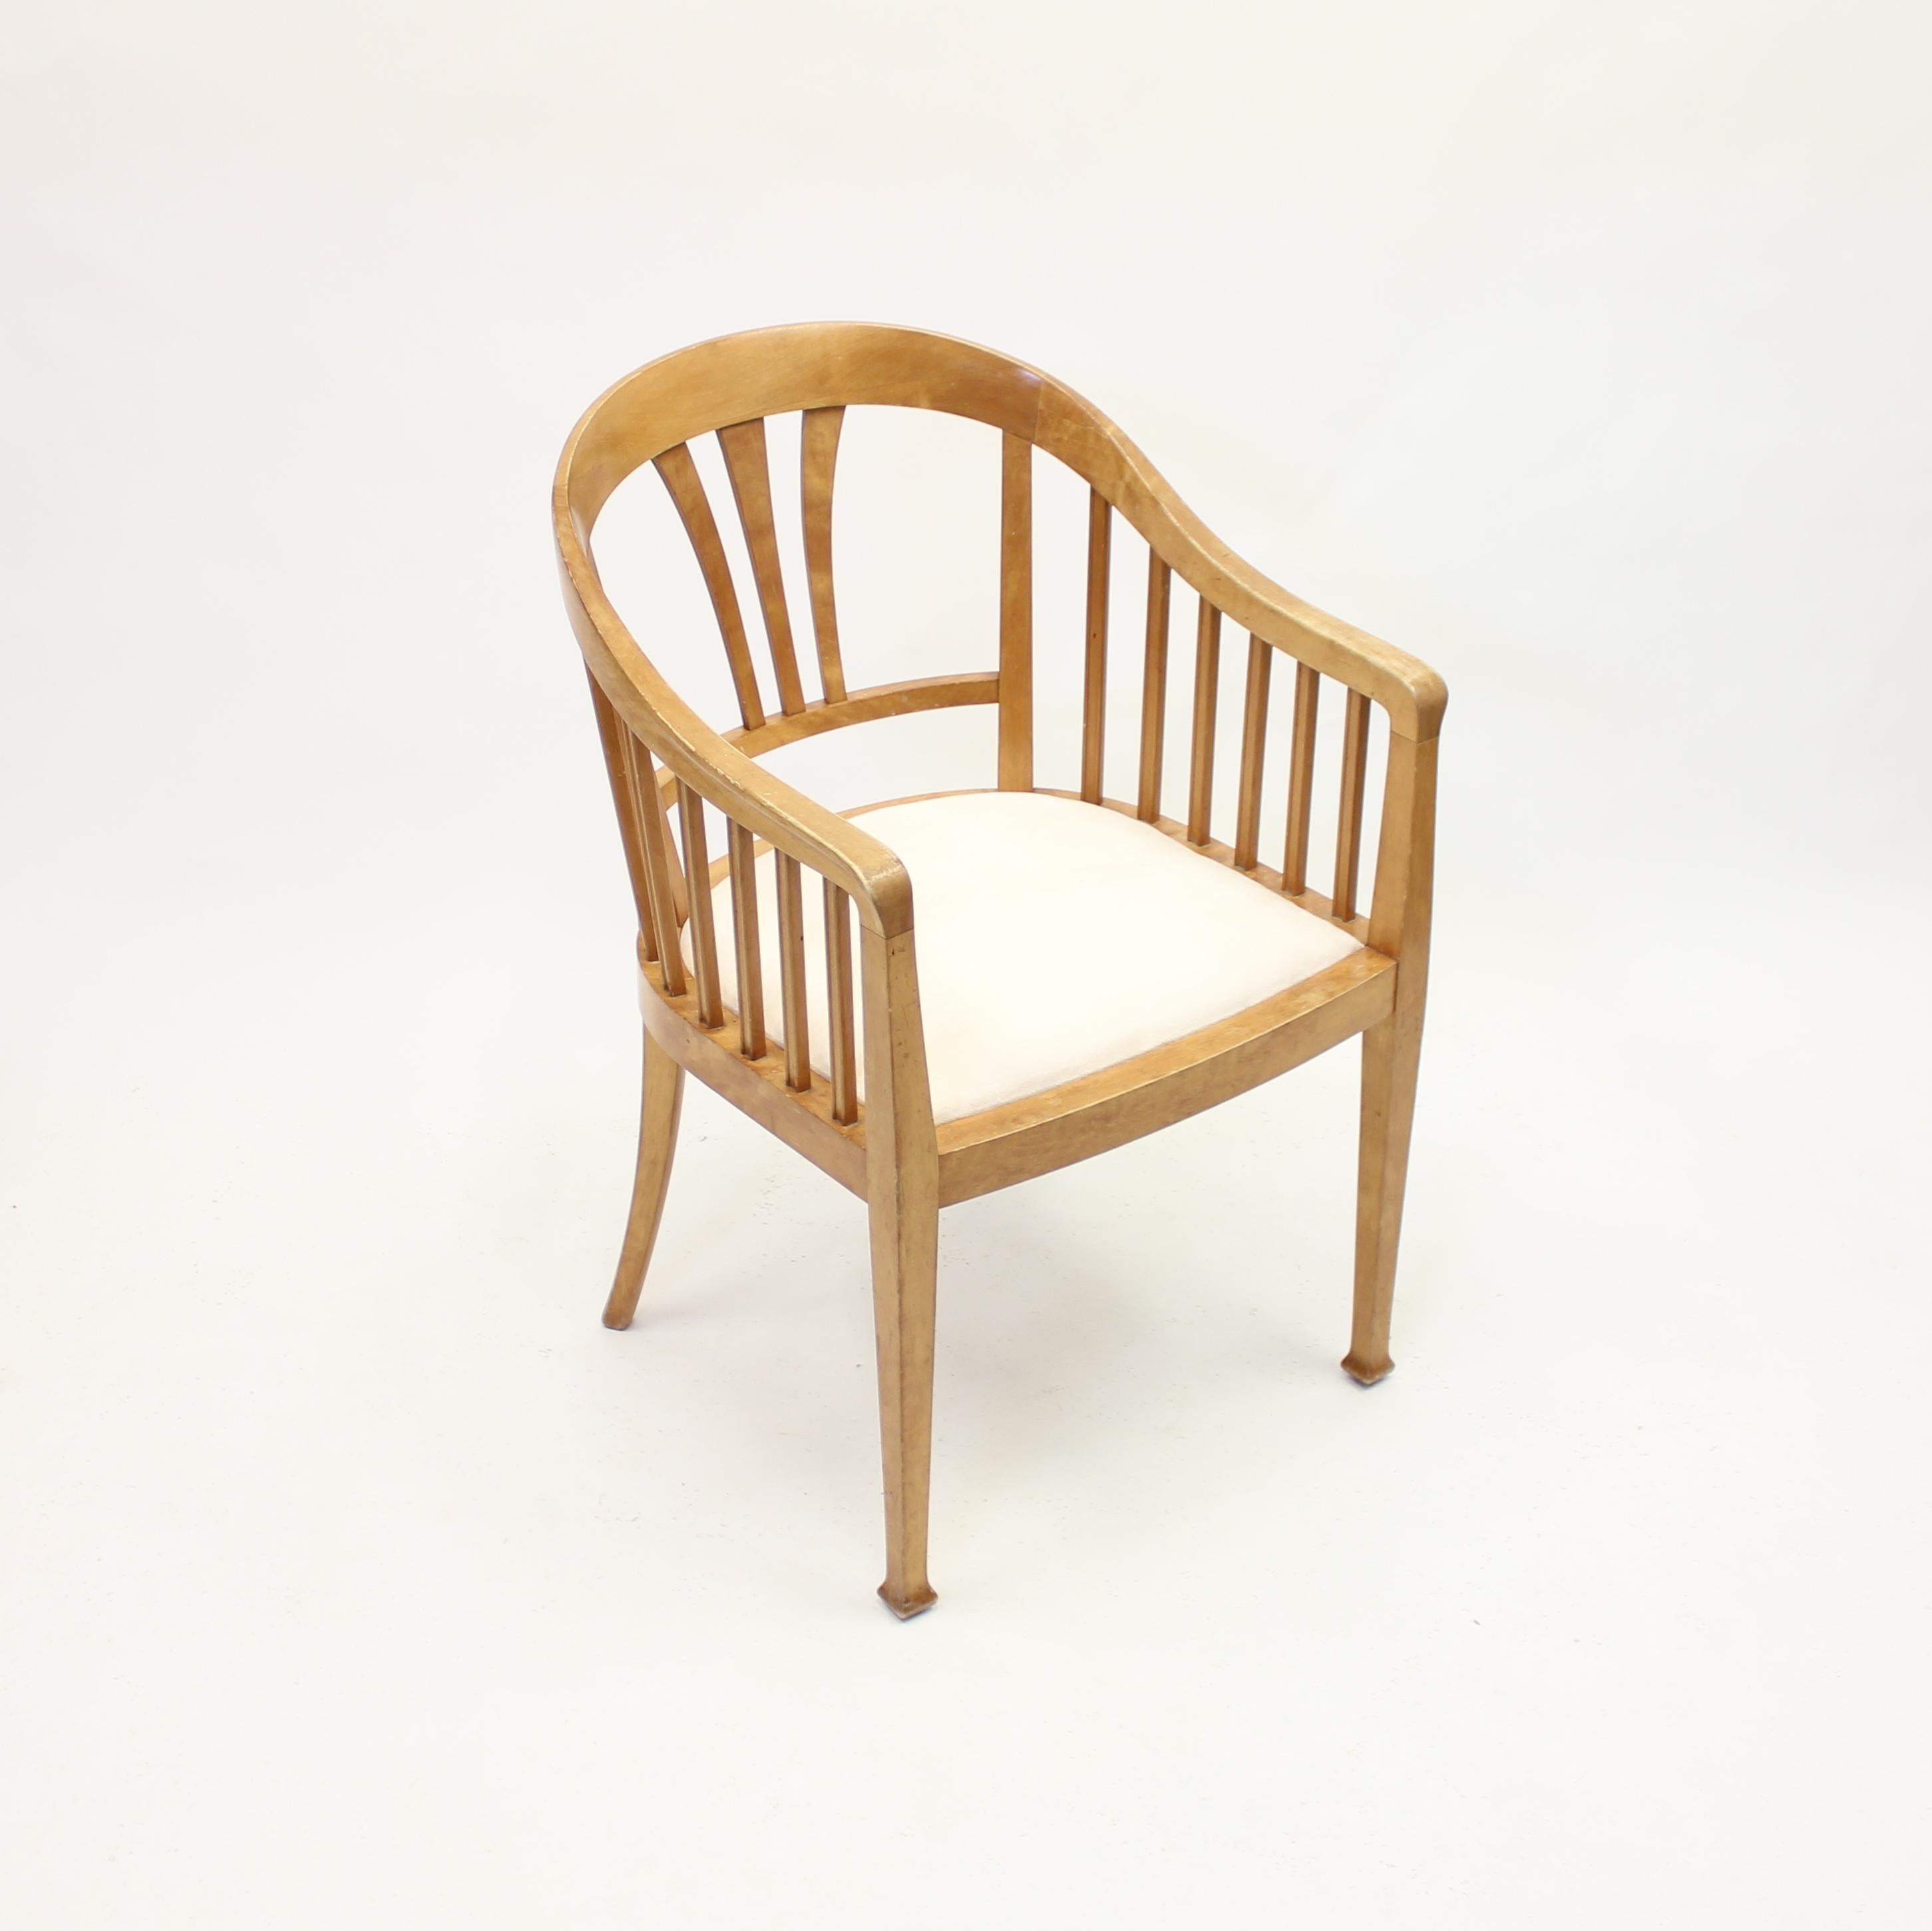 Art Nouveau arm chair in birch with new off white alcantara fabric to the seat. Most likely Swedish and made in the early 20th century. Good vintage condition with light ware consistent with age and use.